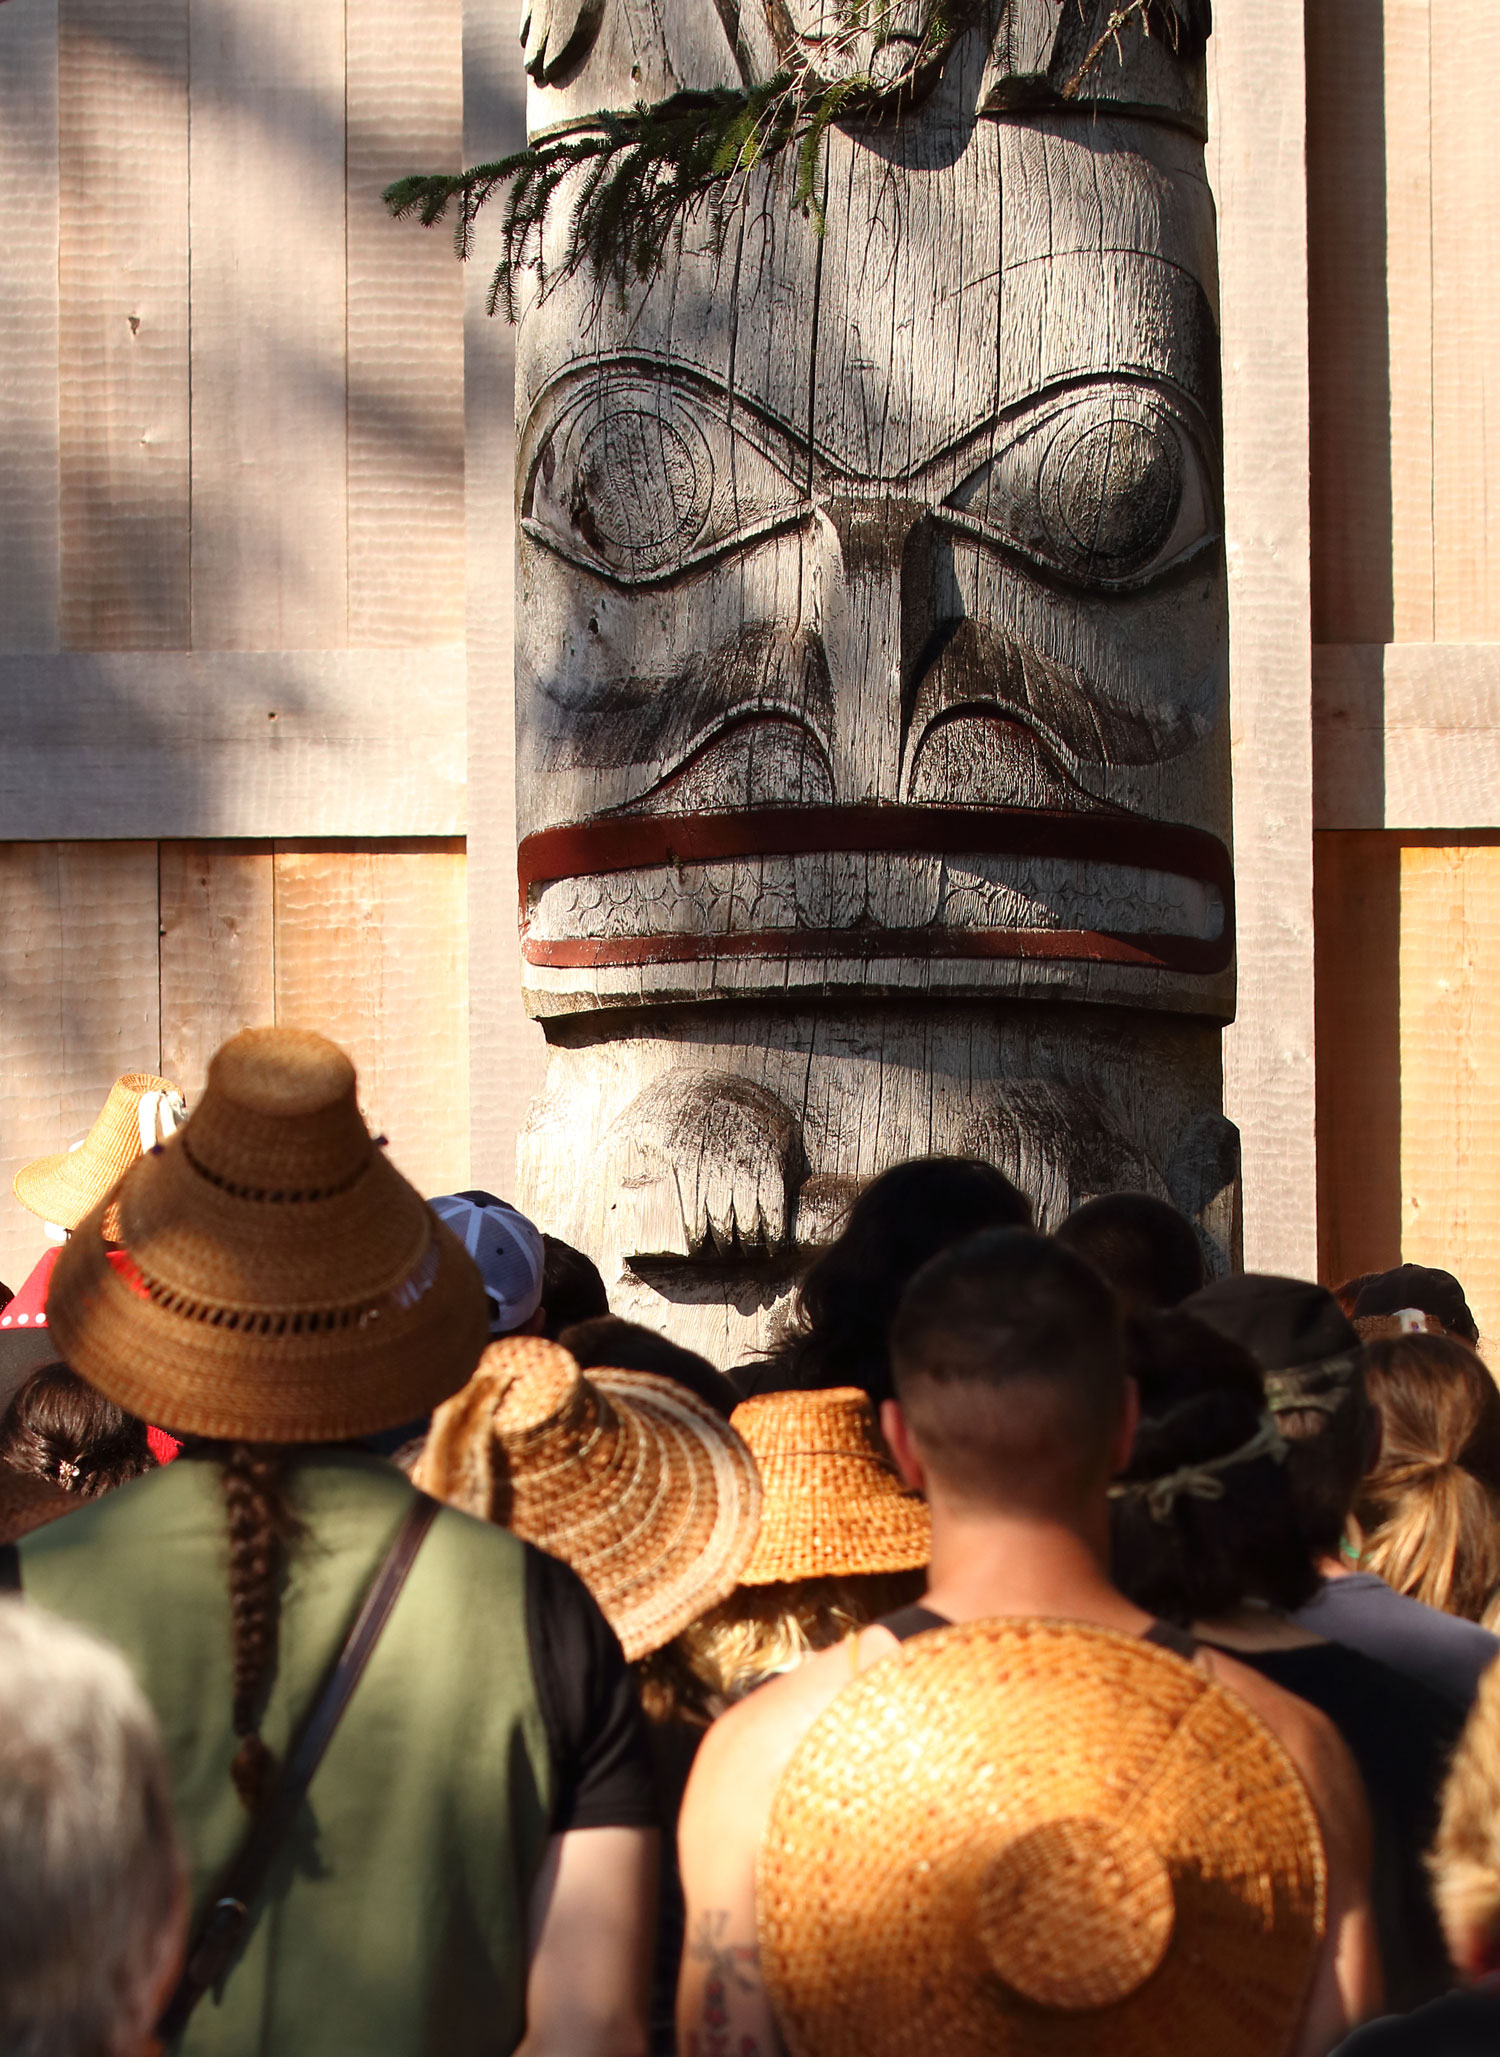 There was a big crowd at the Whale House. The frontal totem in this photo is huge and towers over 50 feet high.